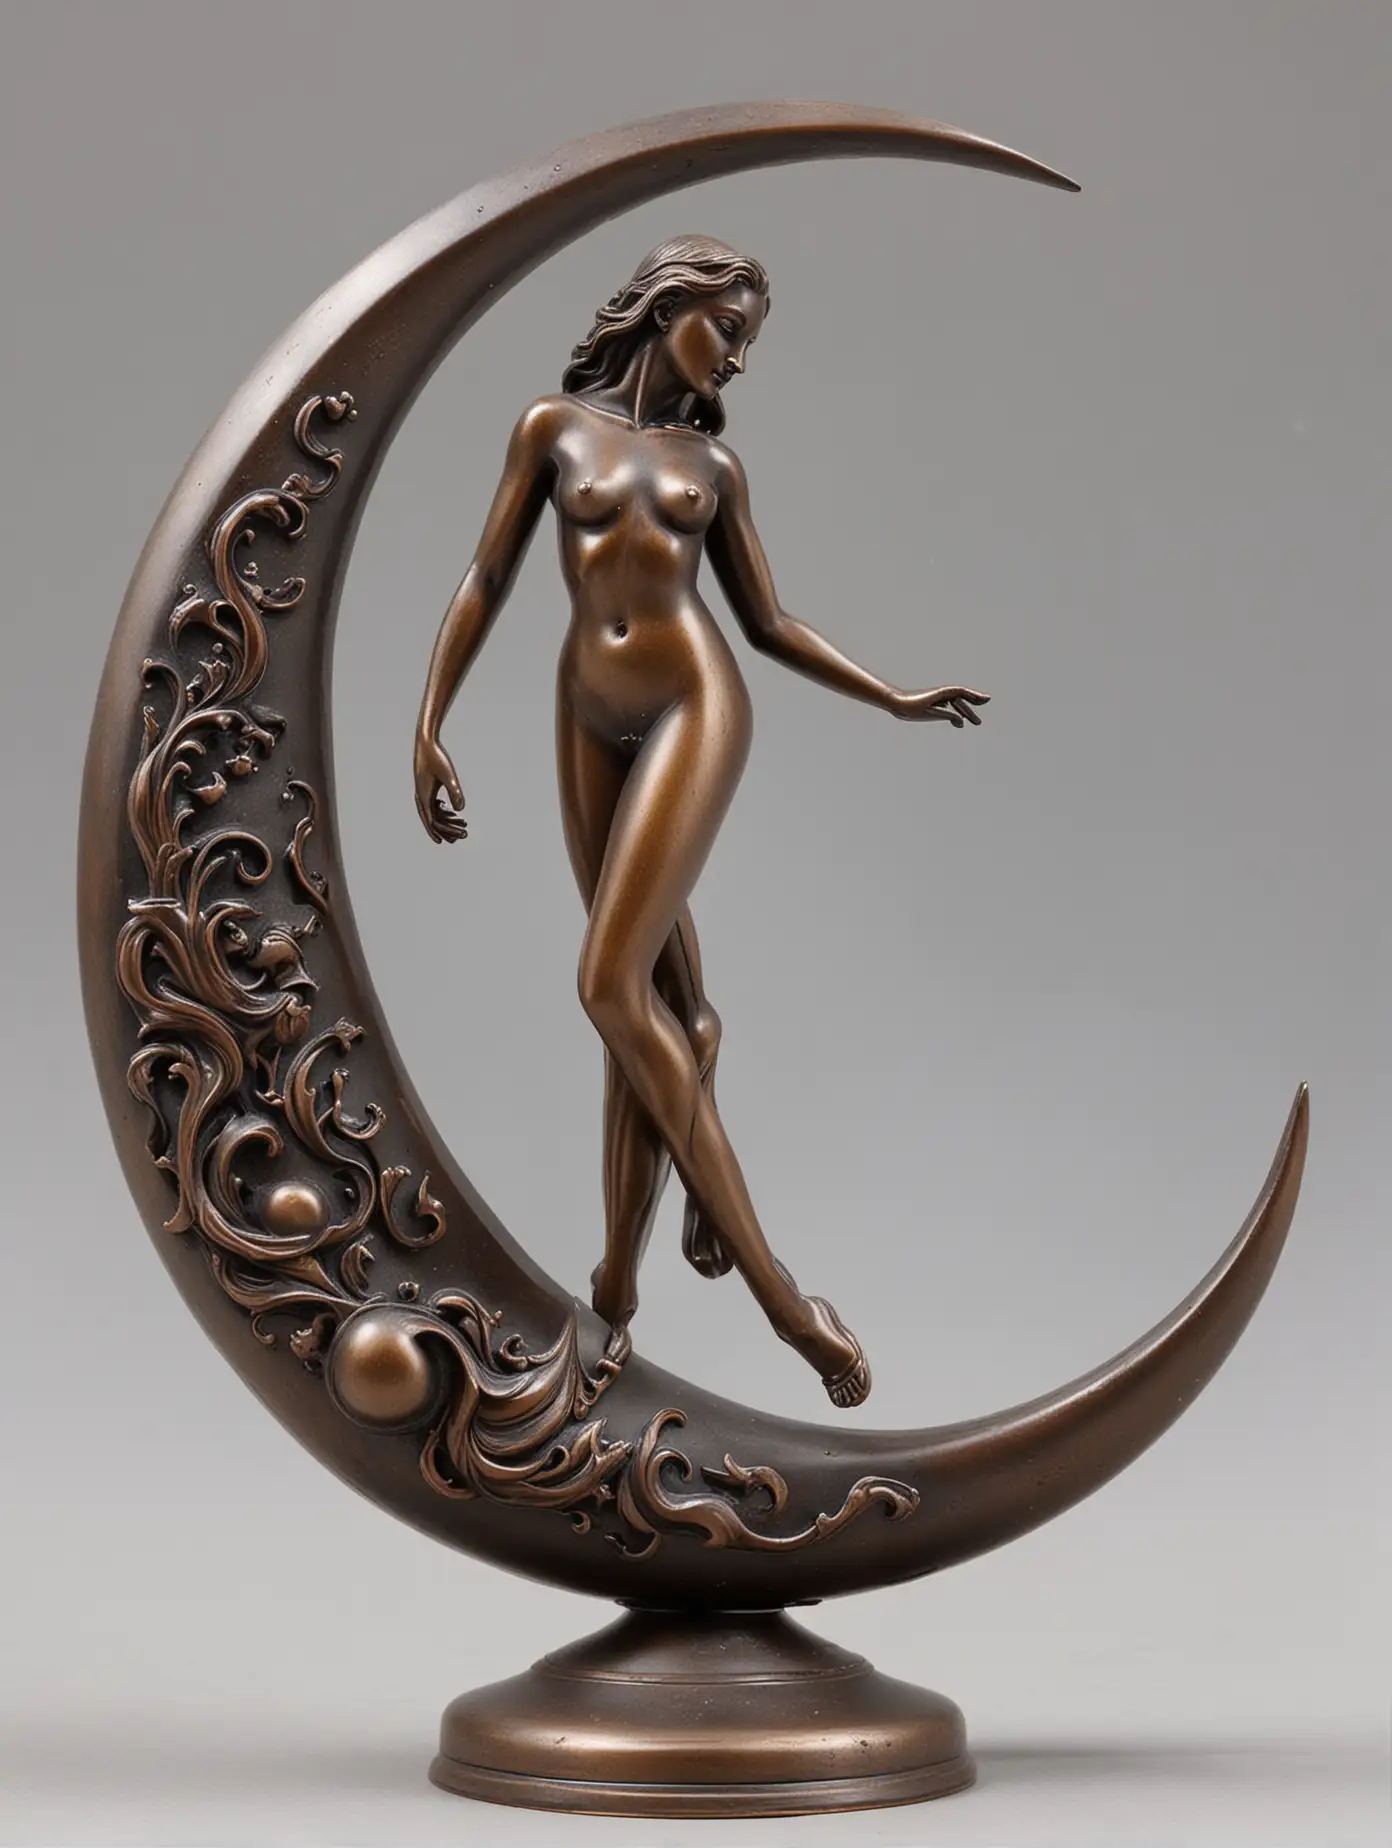 Stainless Steel Crescent Moon and Nude Female Chess Set